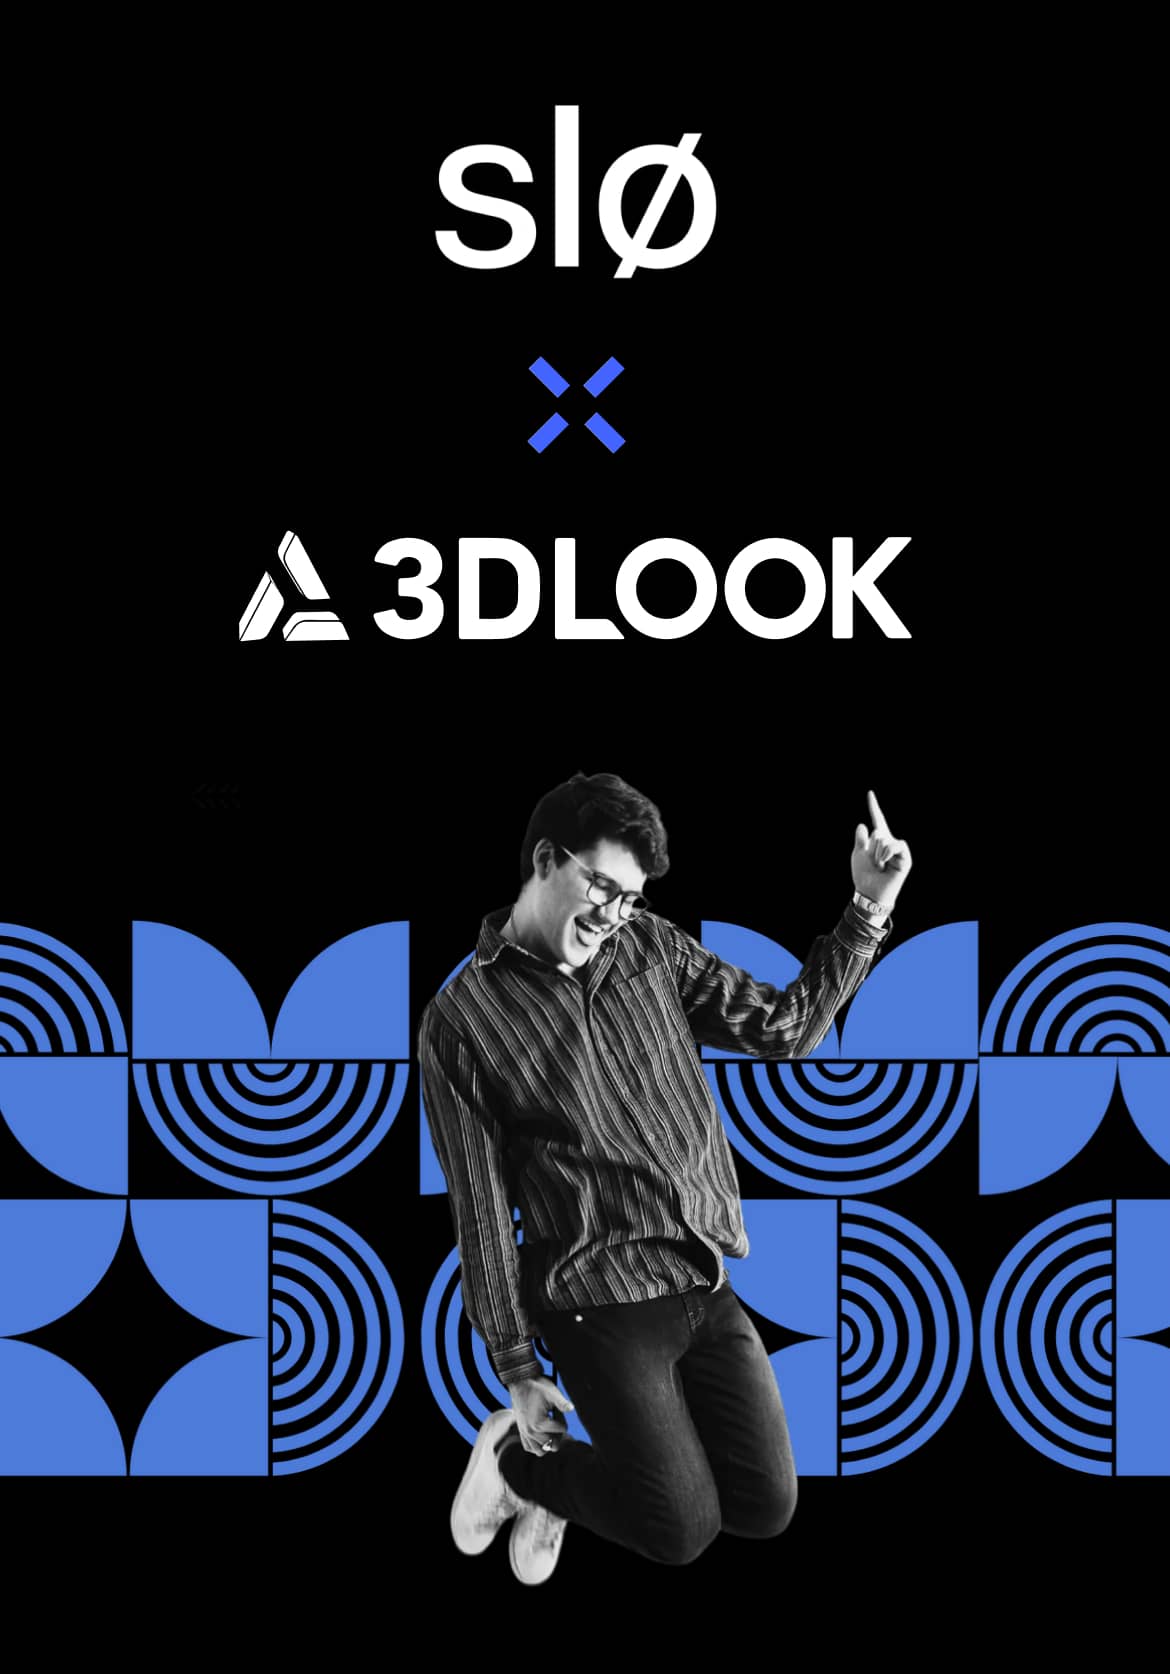 Get a slo a 3d look with slø jeans - Case Study.